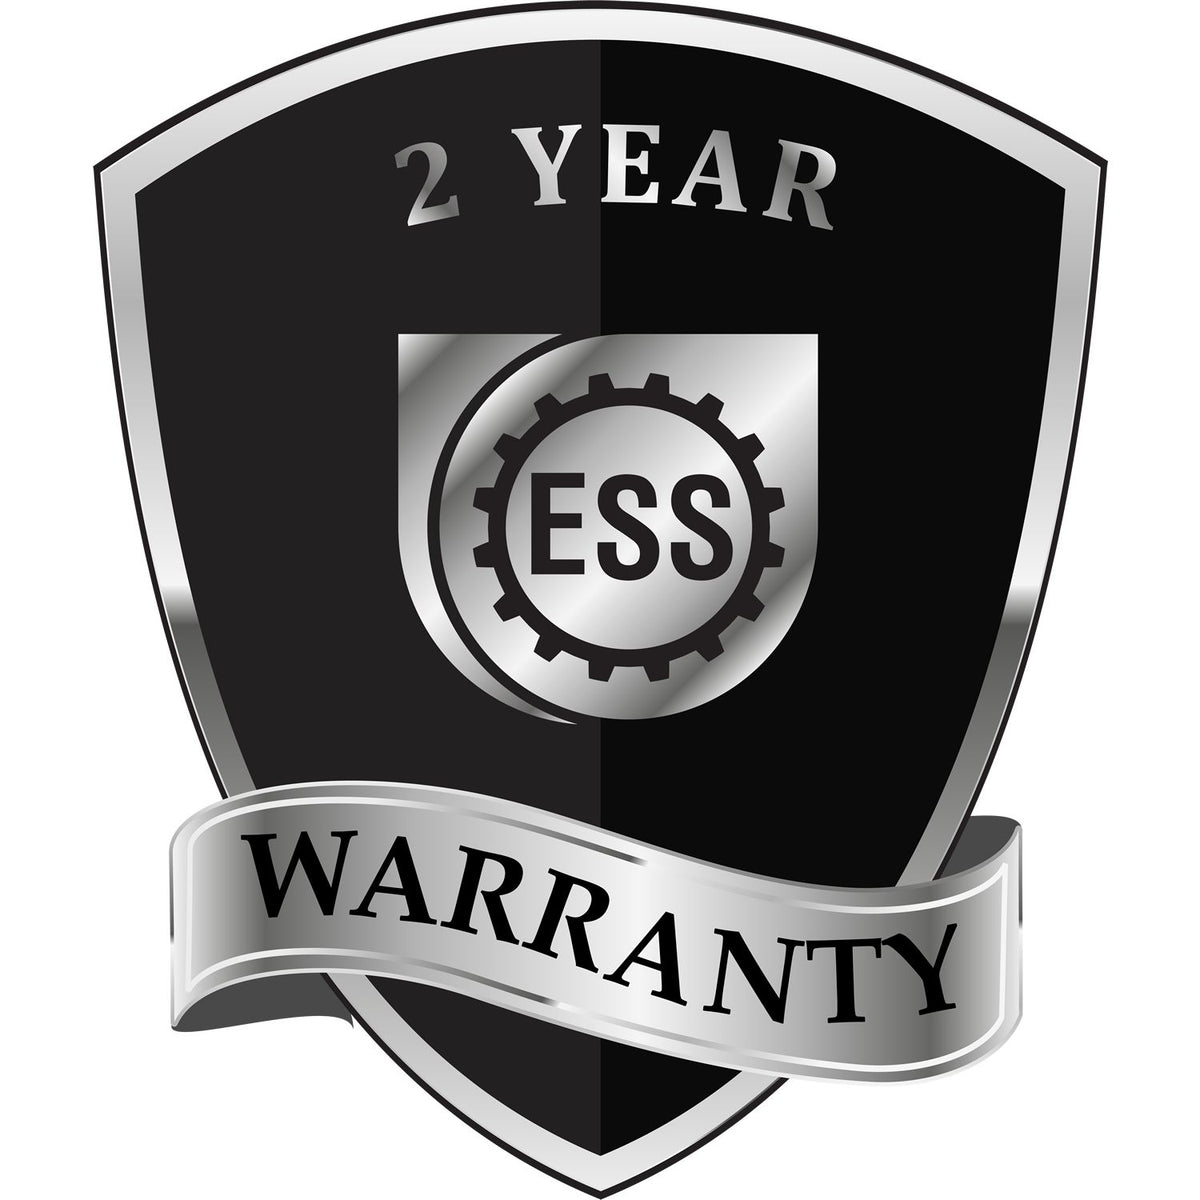 A badge or emblem showing a warranty icon for the Heavy Duty Cast Iron Kentucky Land Surveyor Seal Embosser